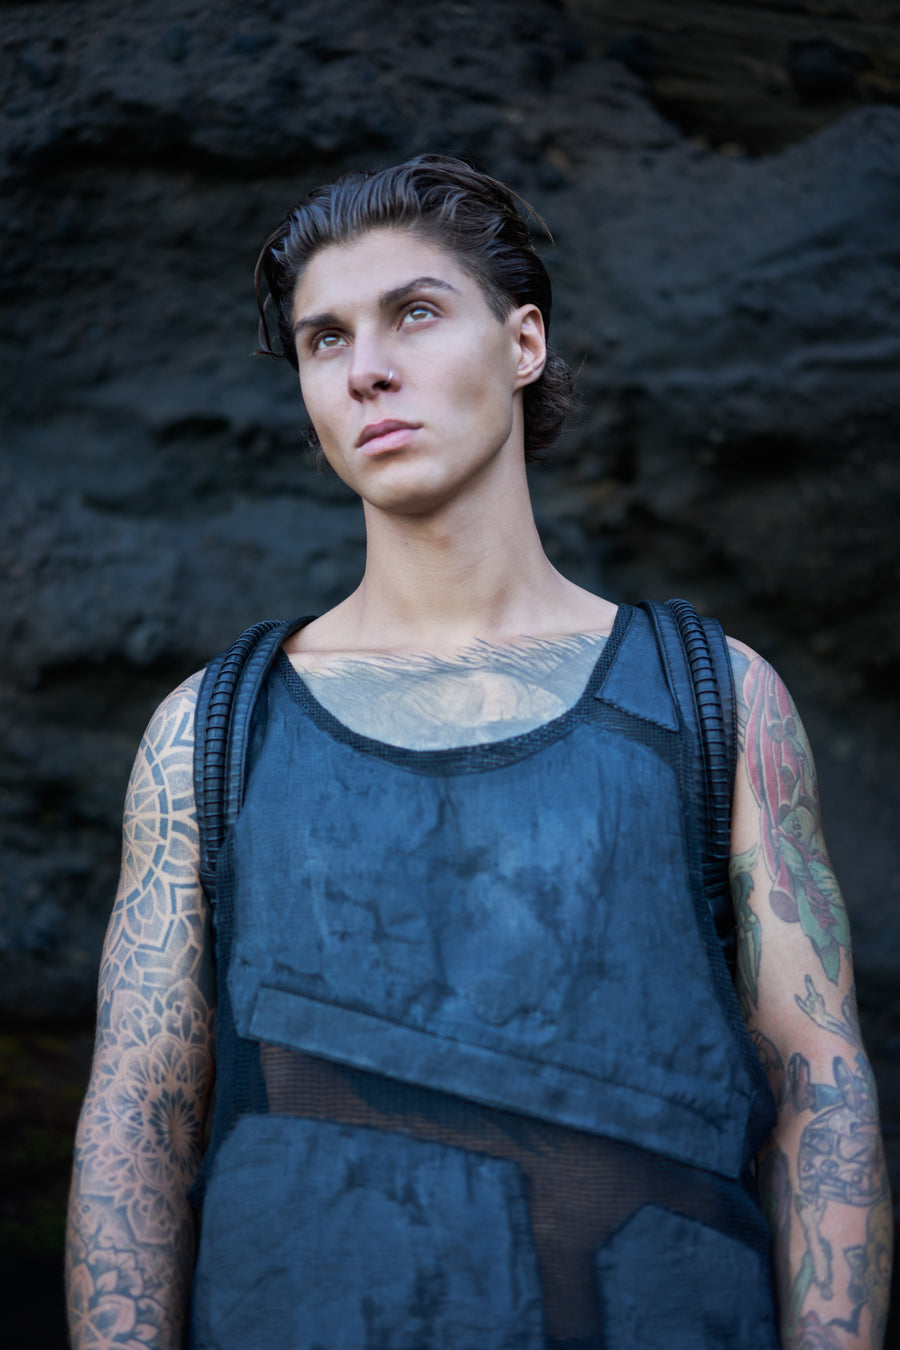 Men's post-apocalyptic mesh tank top with leather avant-garde backpack straps